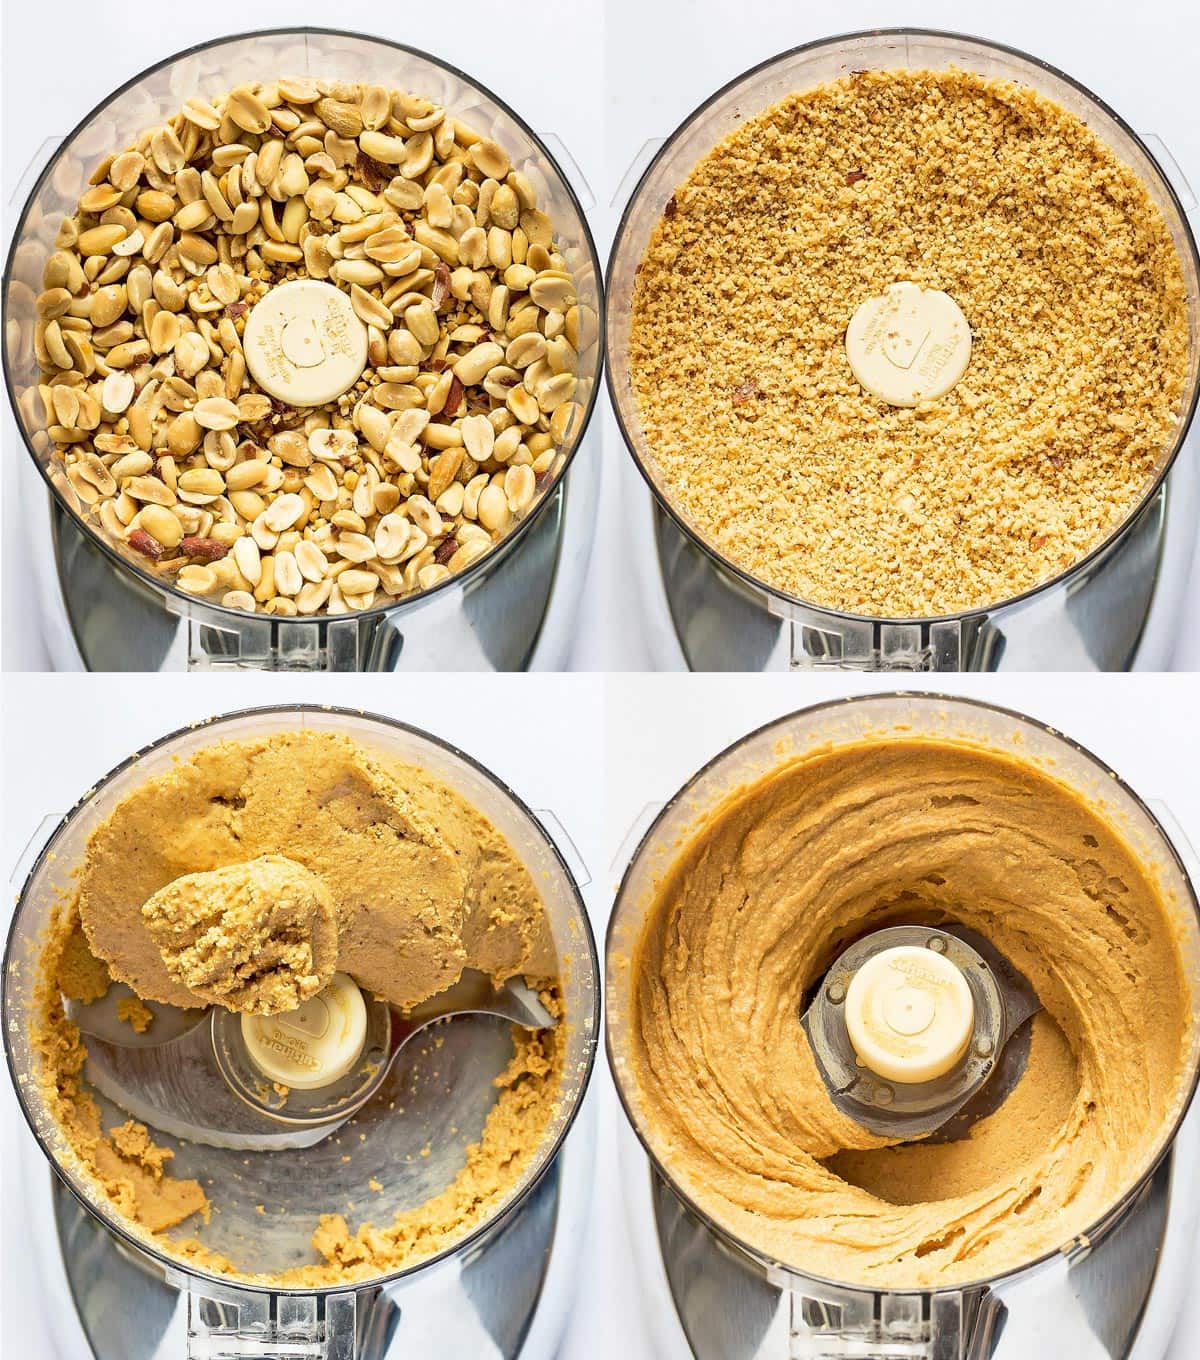 Stages of making peanut butter